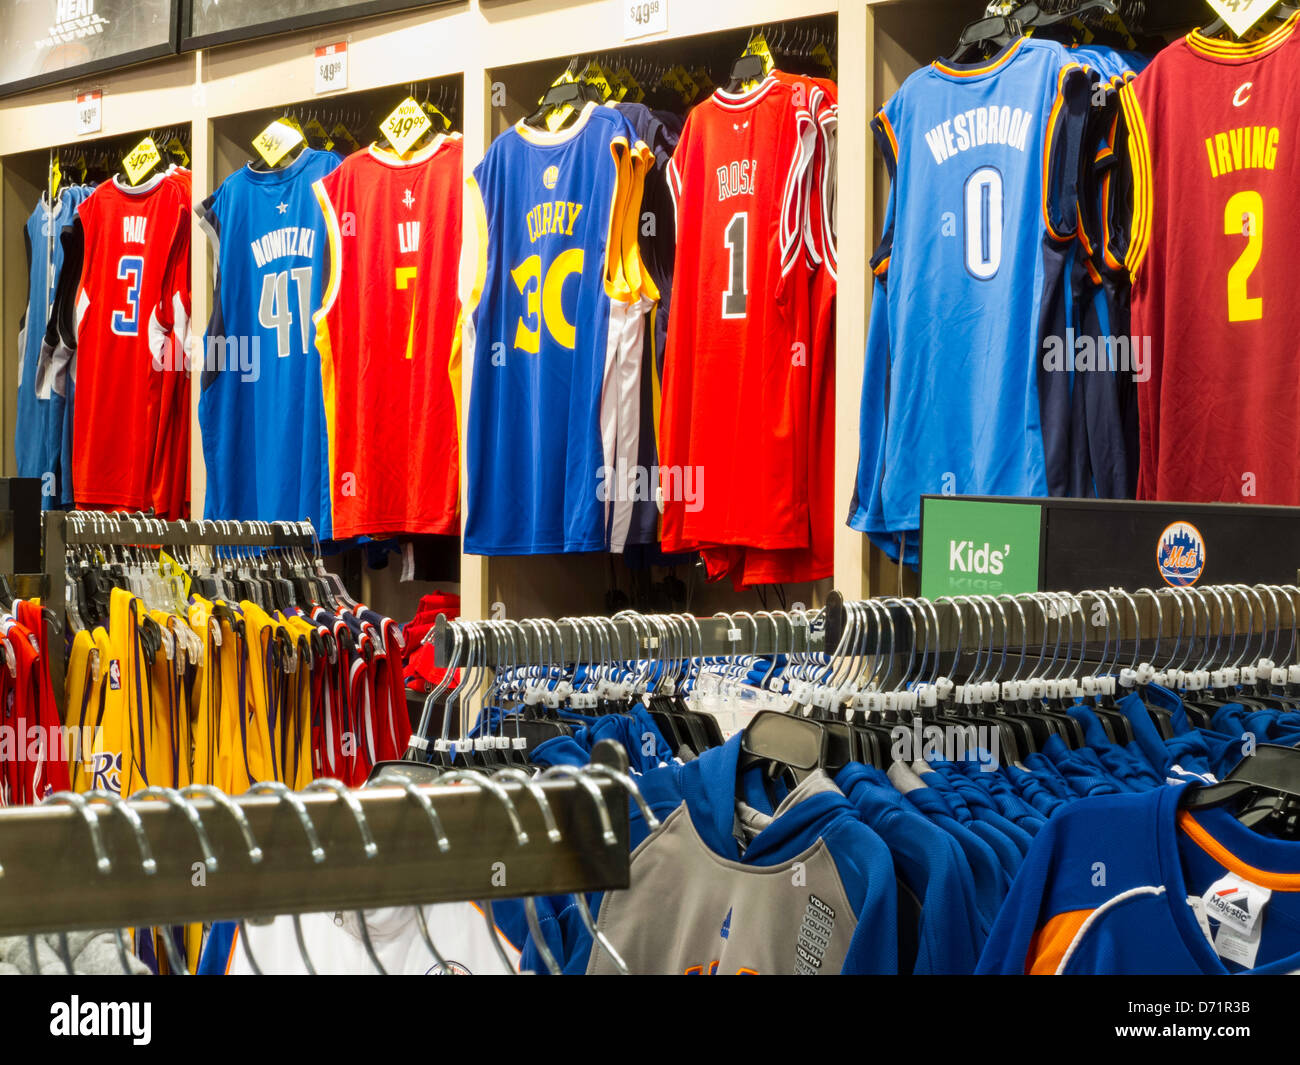 LeBron James, Cleveland Cavs Game Jerseys, Modell's Sporting Goods Store  Interior, NYC Stock Photo - Alamy